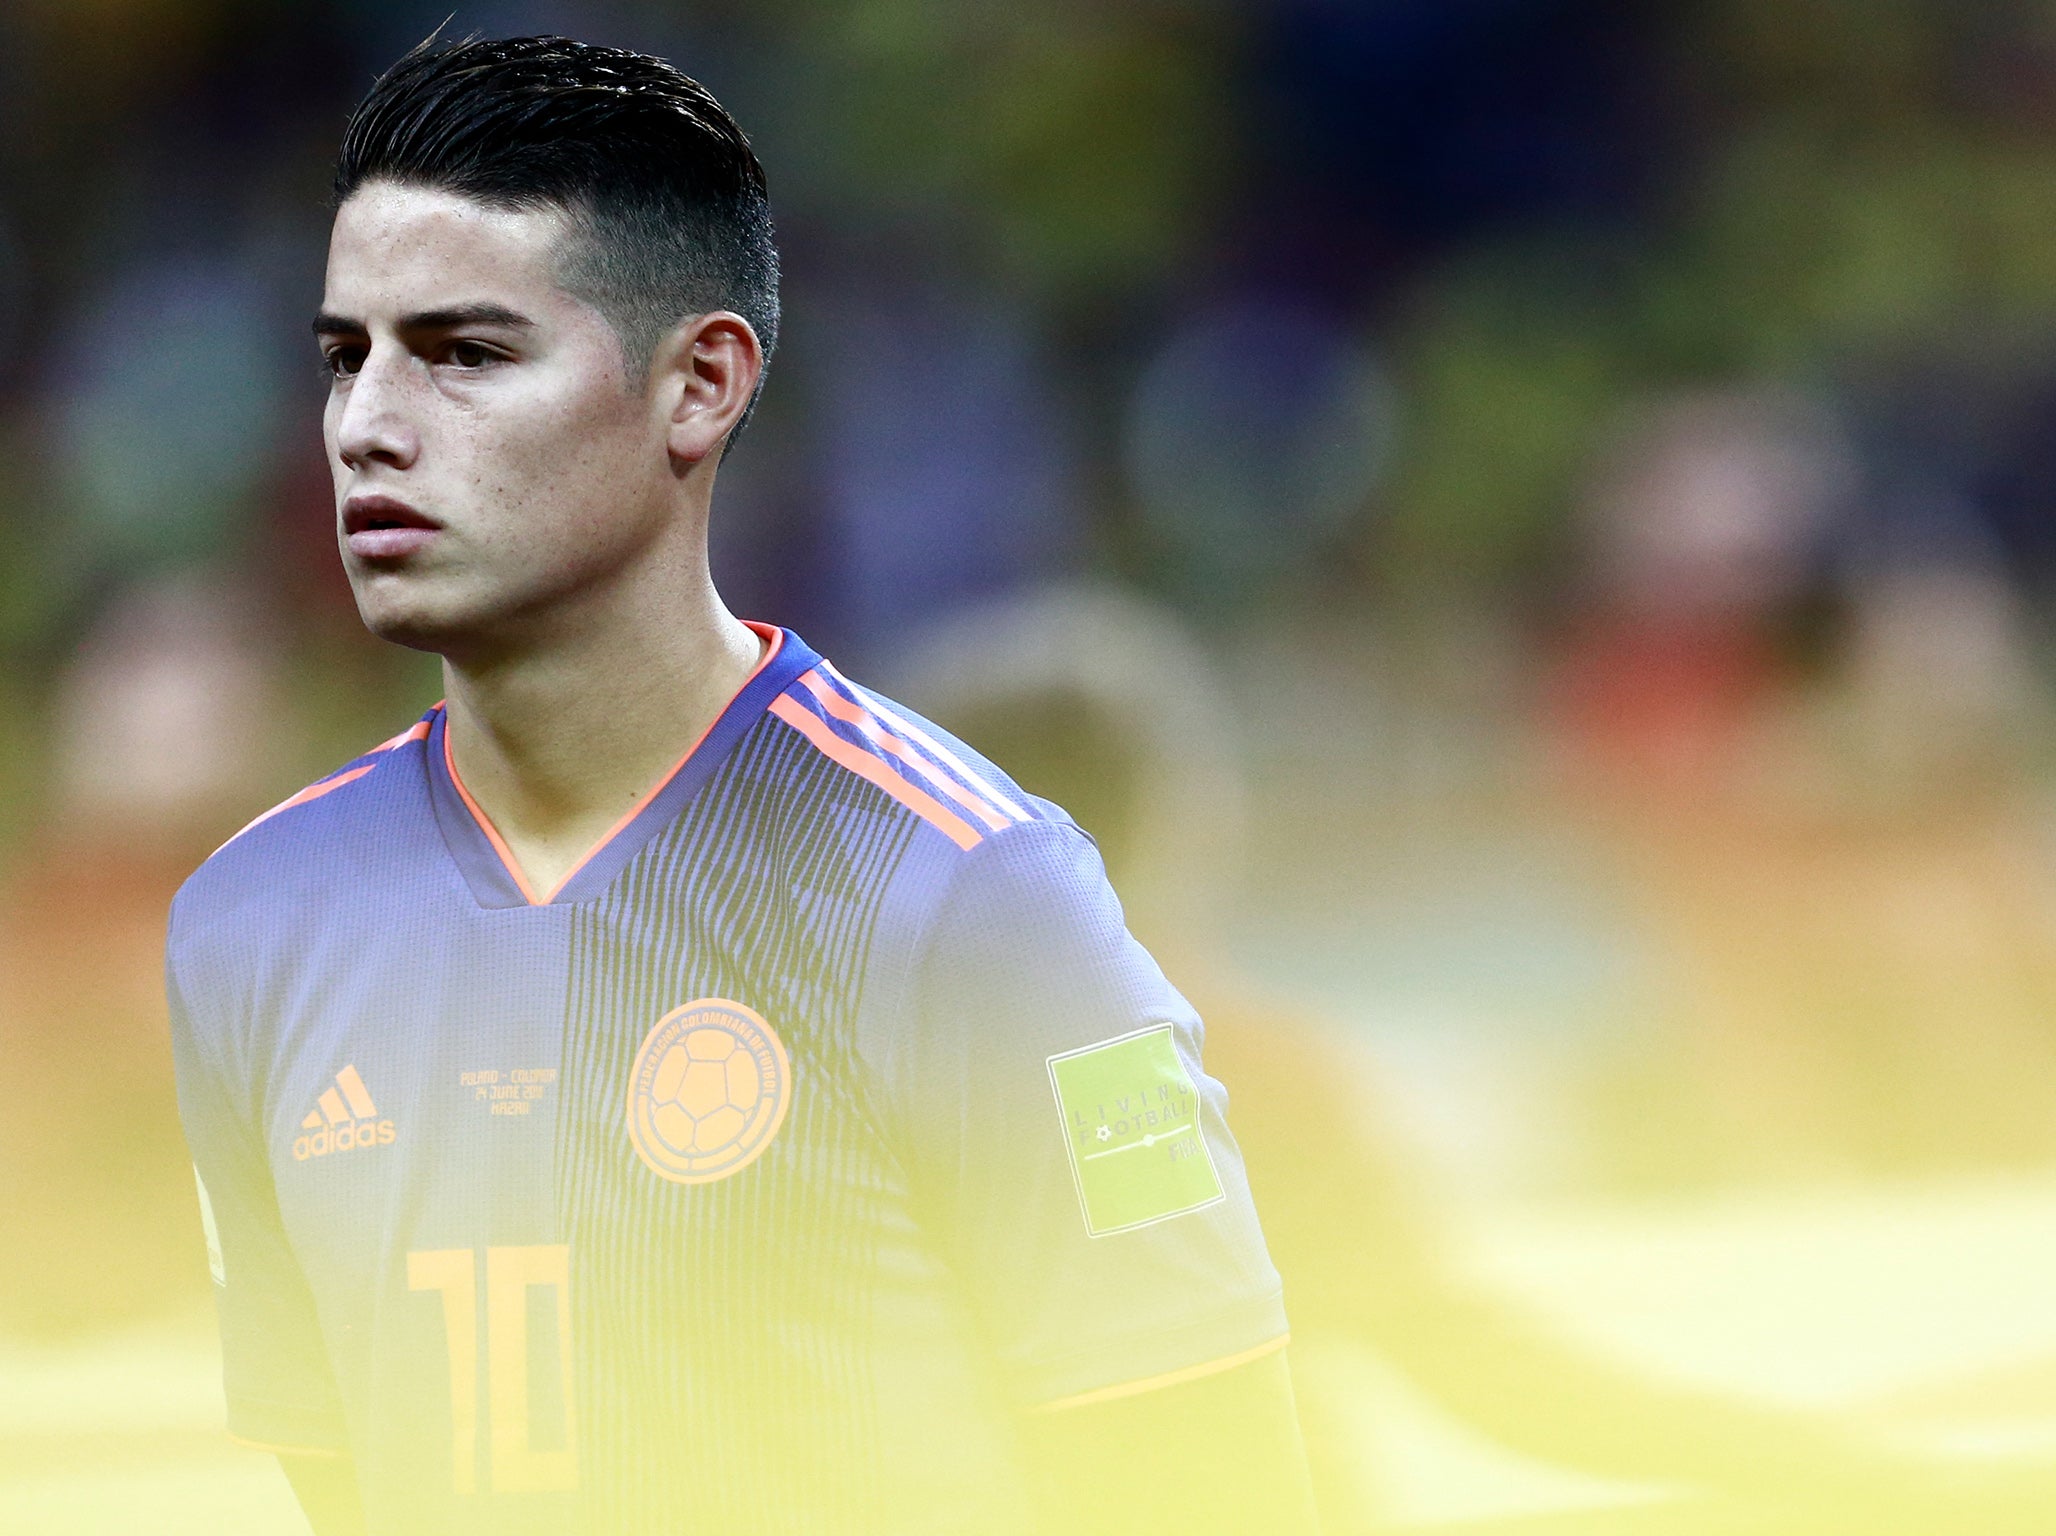 James Rodriguez was brilliant for Colombia